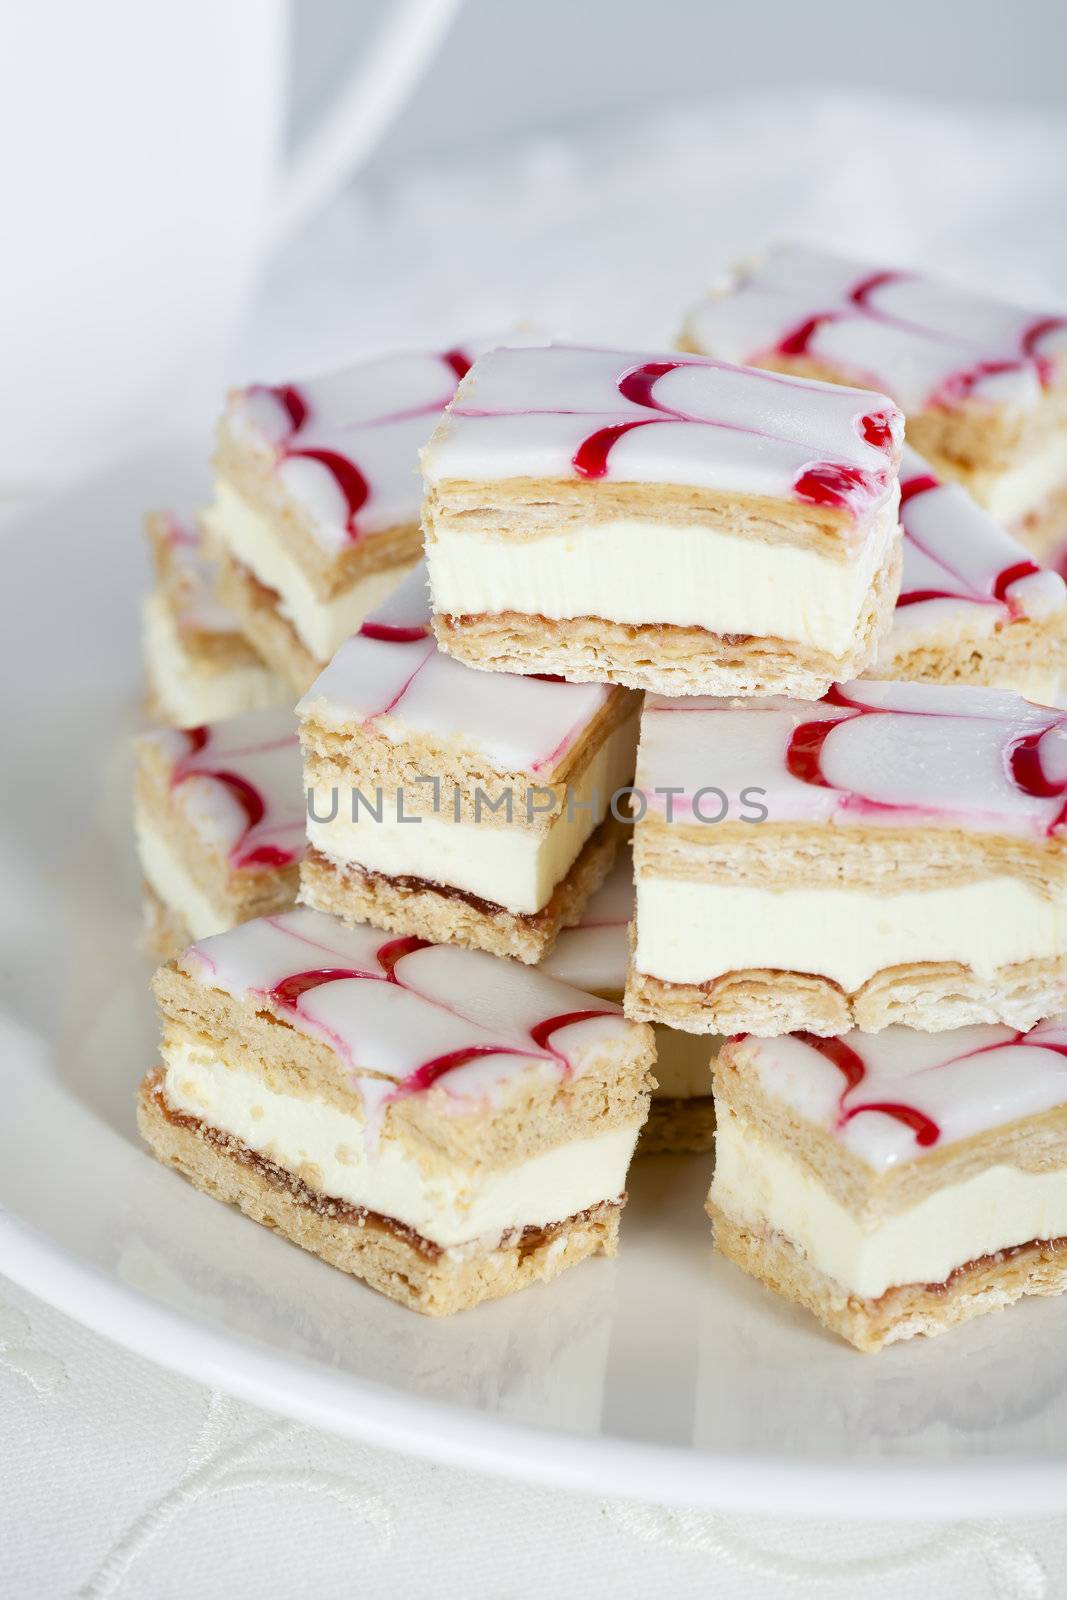 Tompouce, a common pastry in the Netherlands and Belgium.  Here with red and white icing, not the traditional pink.